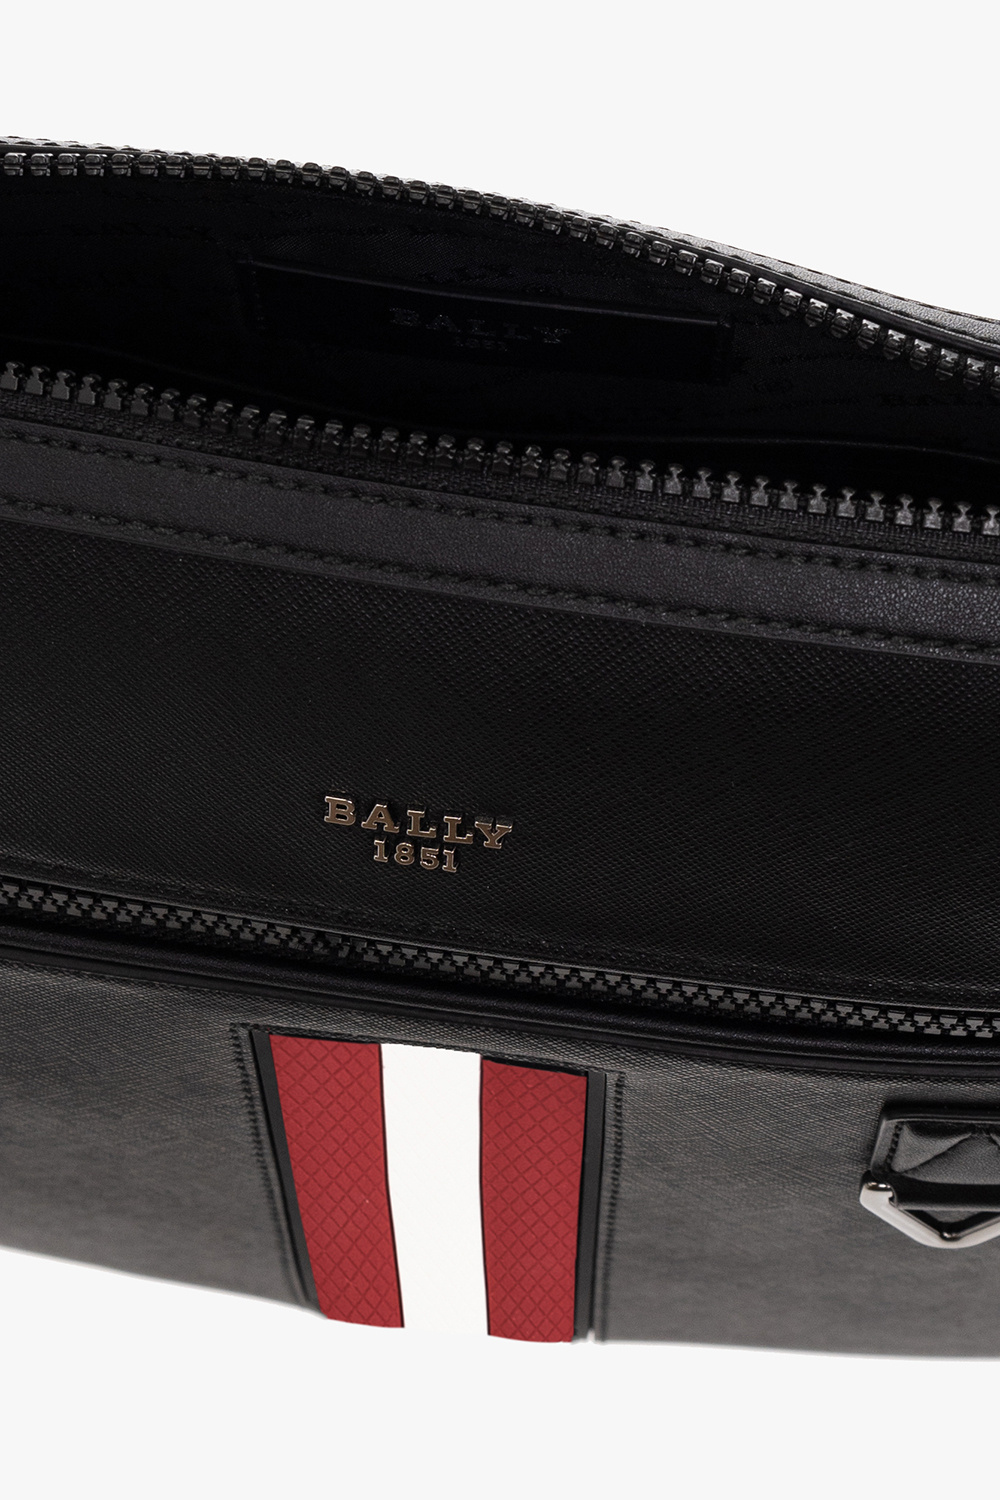 Bally Pre-owned Women's Leather Clutch Bag - Black - One Size